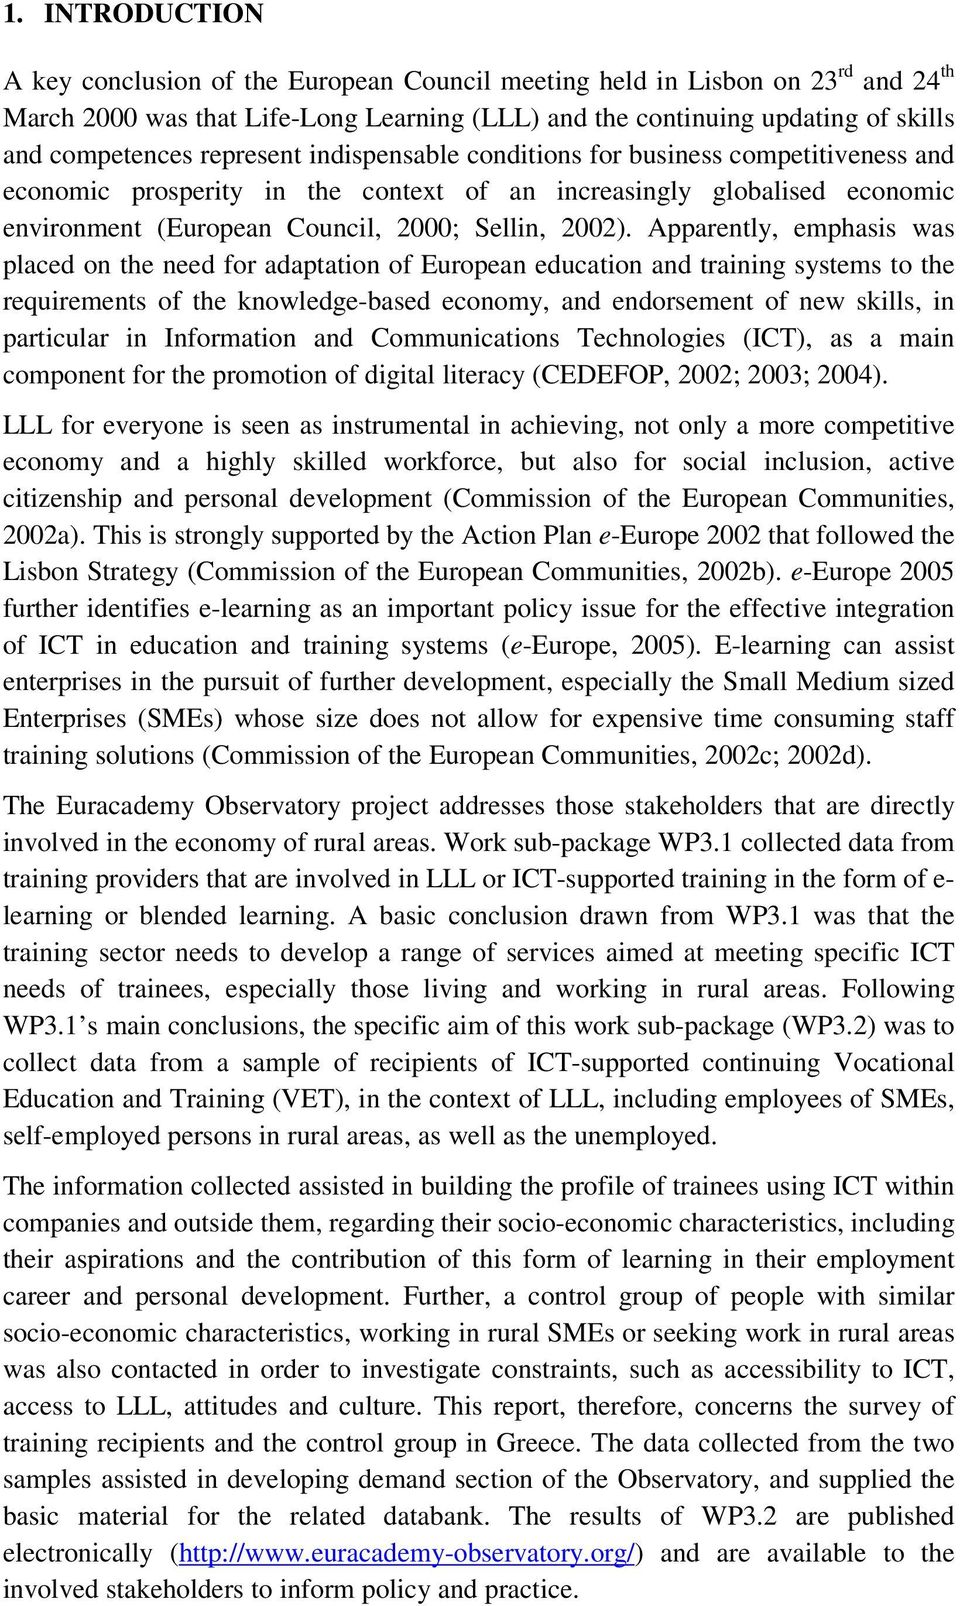 Apparently, emphasis was placed on the need for adaptation of European education and training systems to the requirements of the knowledge-based economy, and endorsement of new skills, in particular